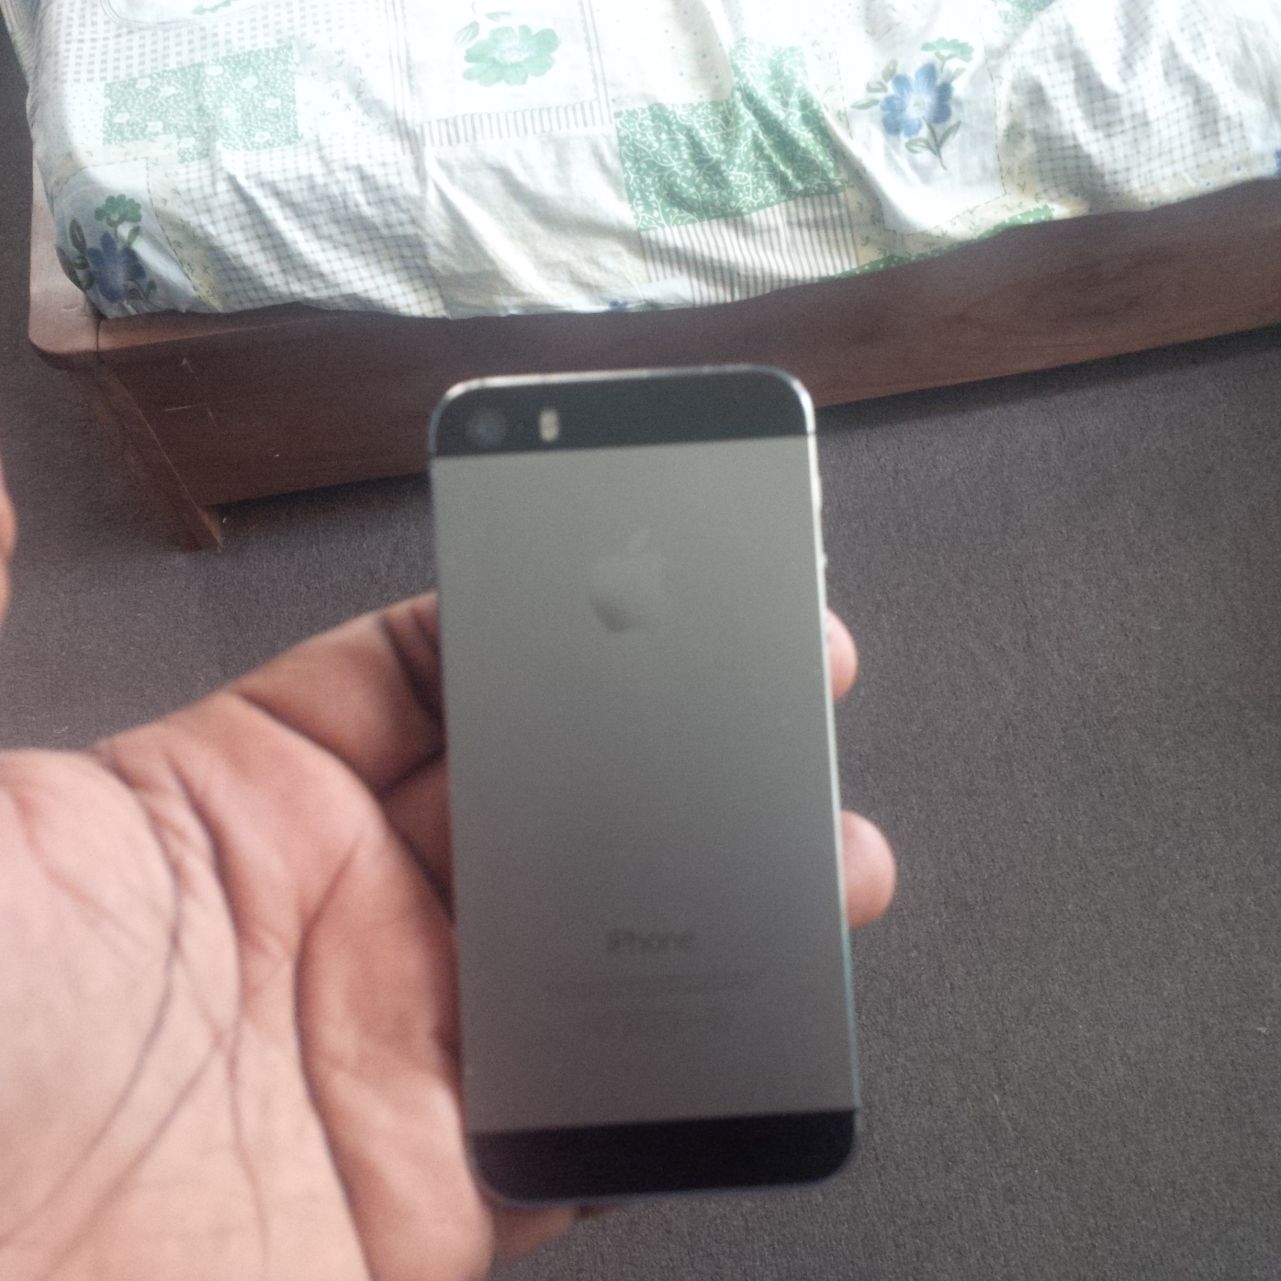 re uk used space gray iphone 5s 16gig for sale by tumababa m 7 33pm on ...